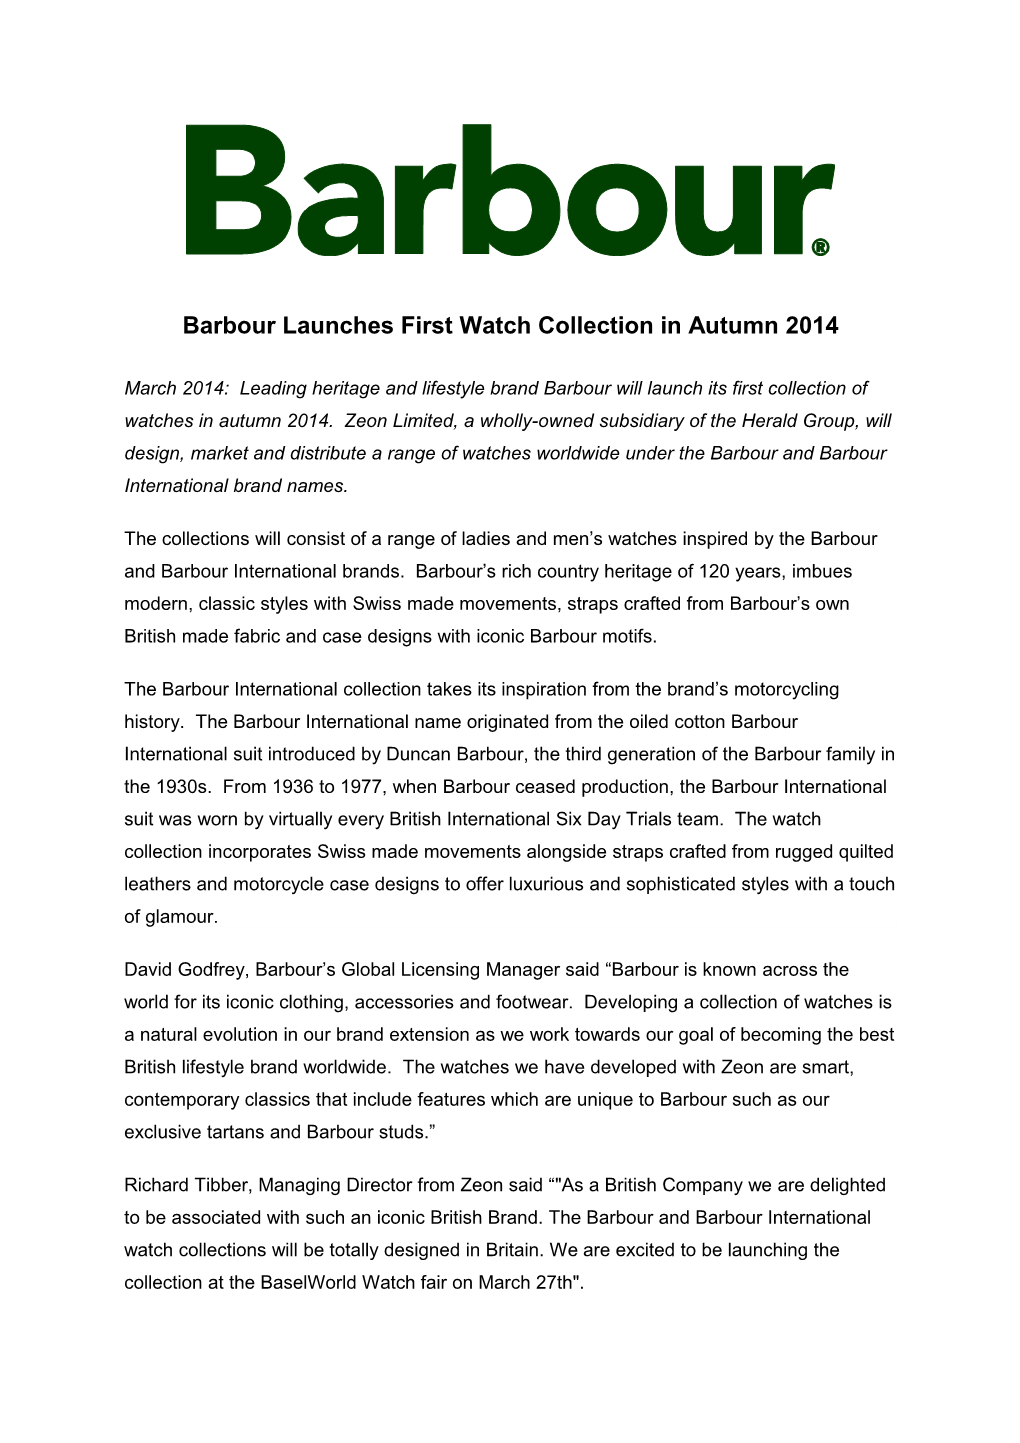 Barbour Launches First Watch Collection in Autumn 2014